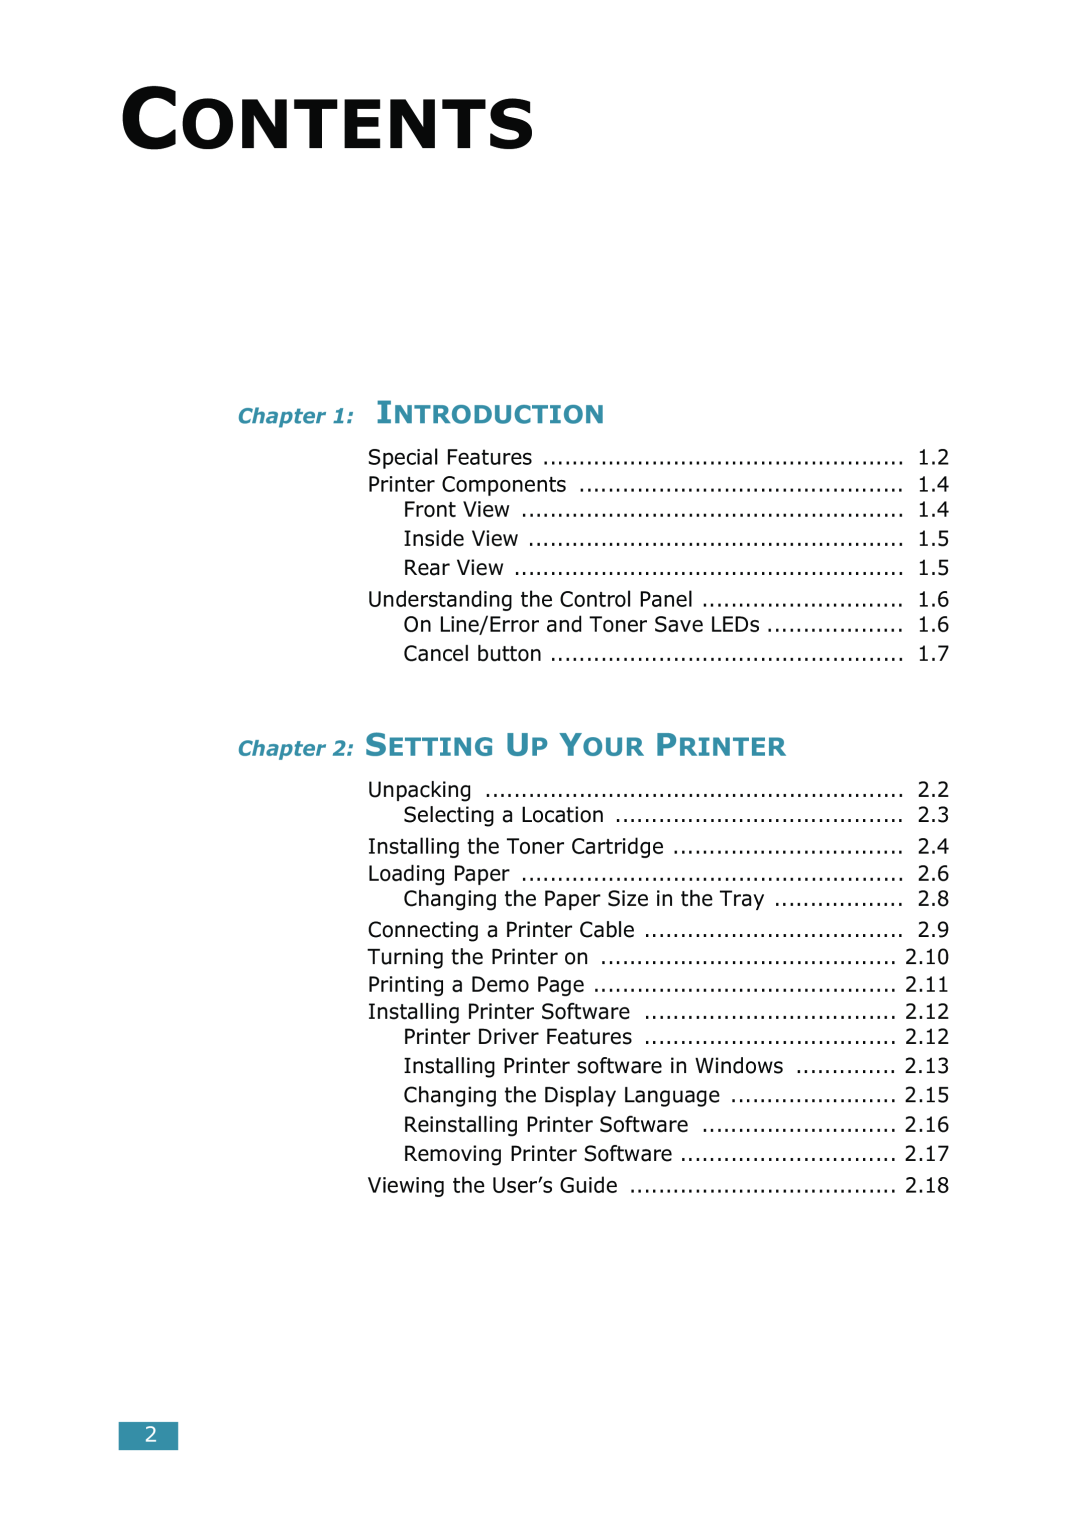 Samsung ML-1520 manual Setting Up Your Printer, Contents, Introduction 